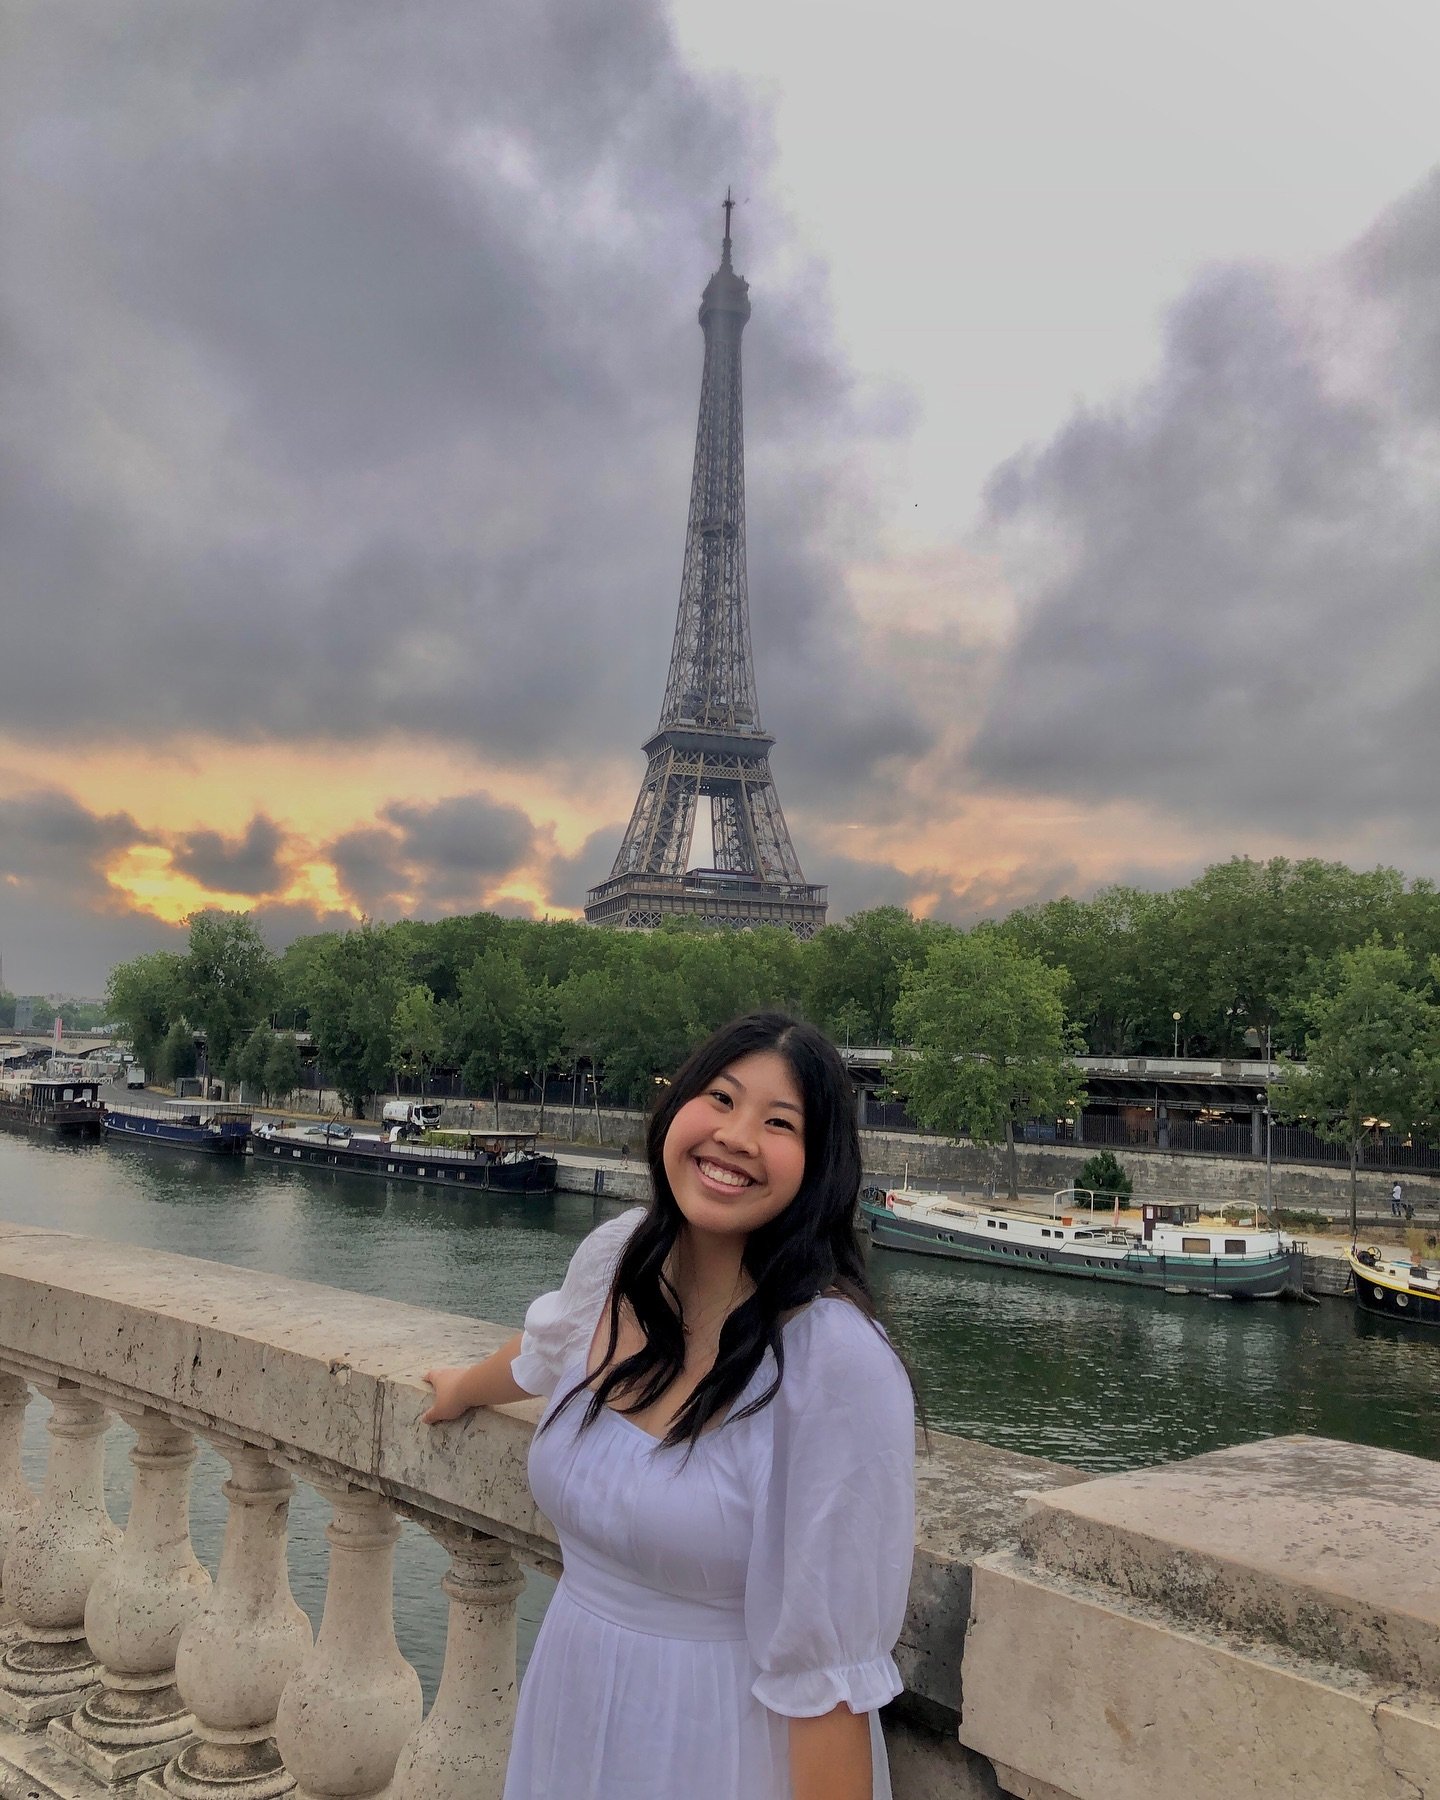 𝓗𝓪𝓹𝓹𝔂 𝓑𝓲𝓻𝓽𝓱𝓭𝓪𝔂 to #284 Ms. Ashlyn &ldquo;Etude&rdquo; Suganuma! A fun fact about her is that she is a major klutz 🤭🤭

~~~~~

#chisigs #uwchisigs #chisigmaalpha #uwchisigmaalpha #happybirthday #happybday #pearlescentalphapis